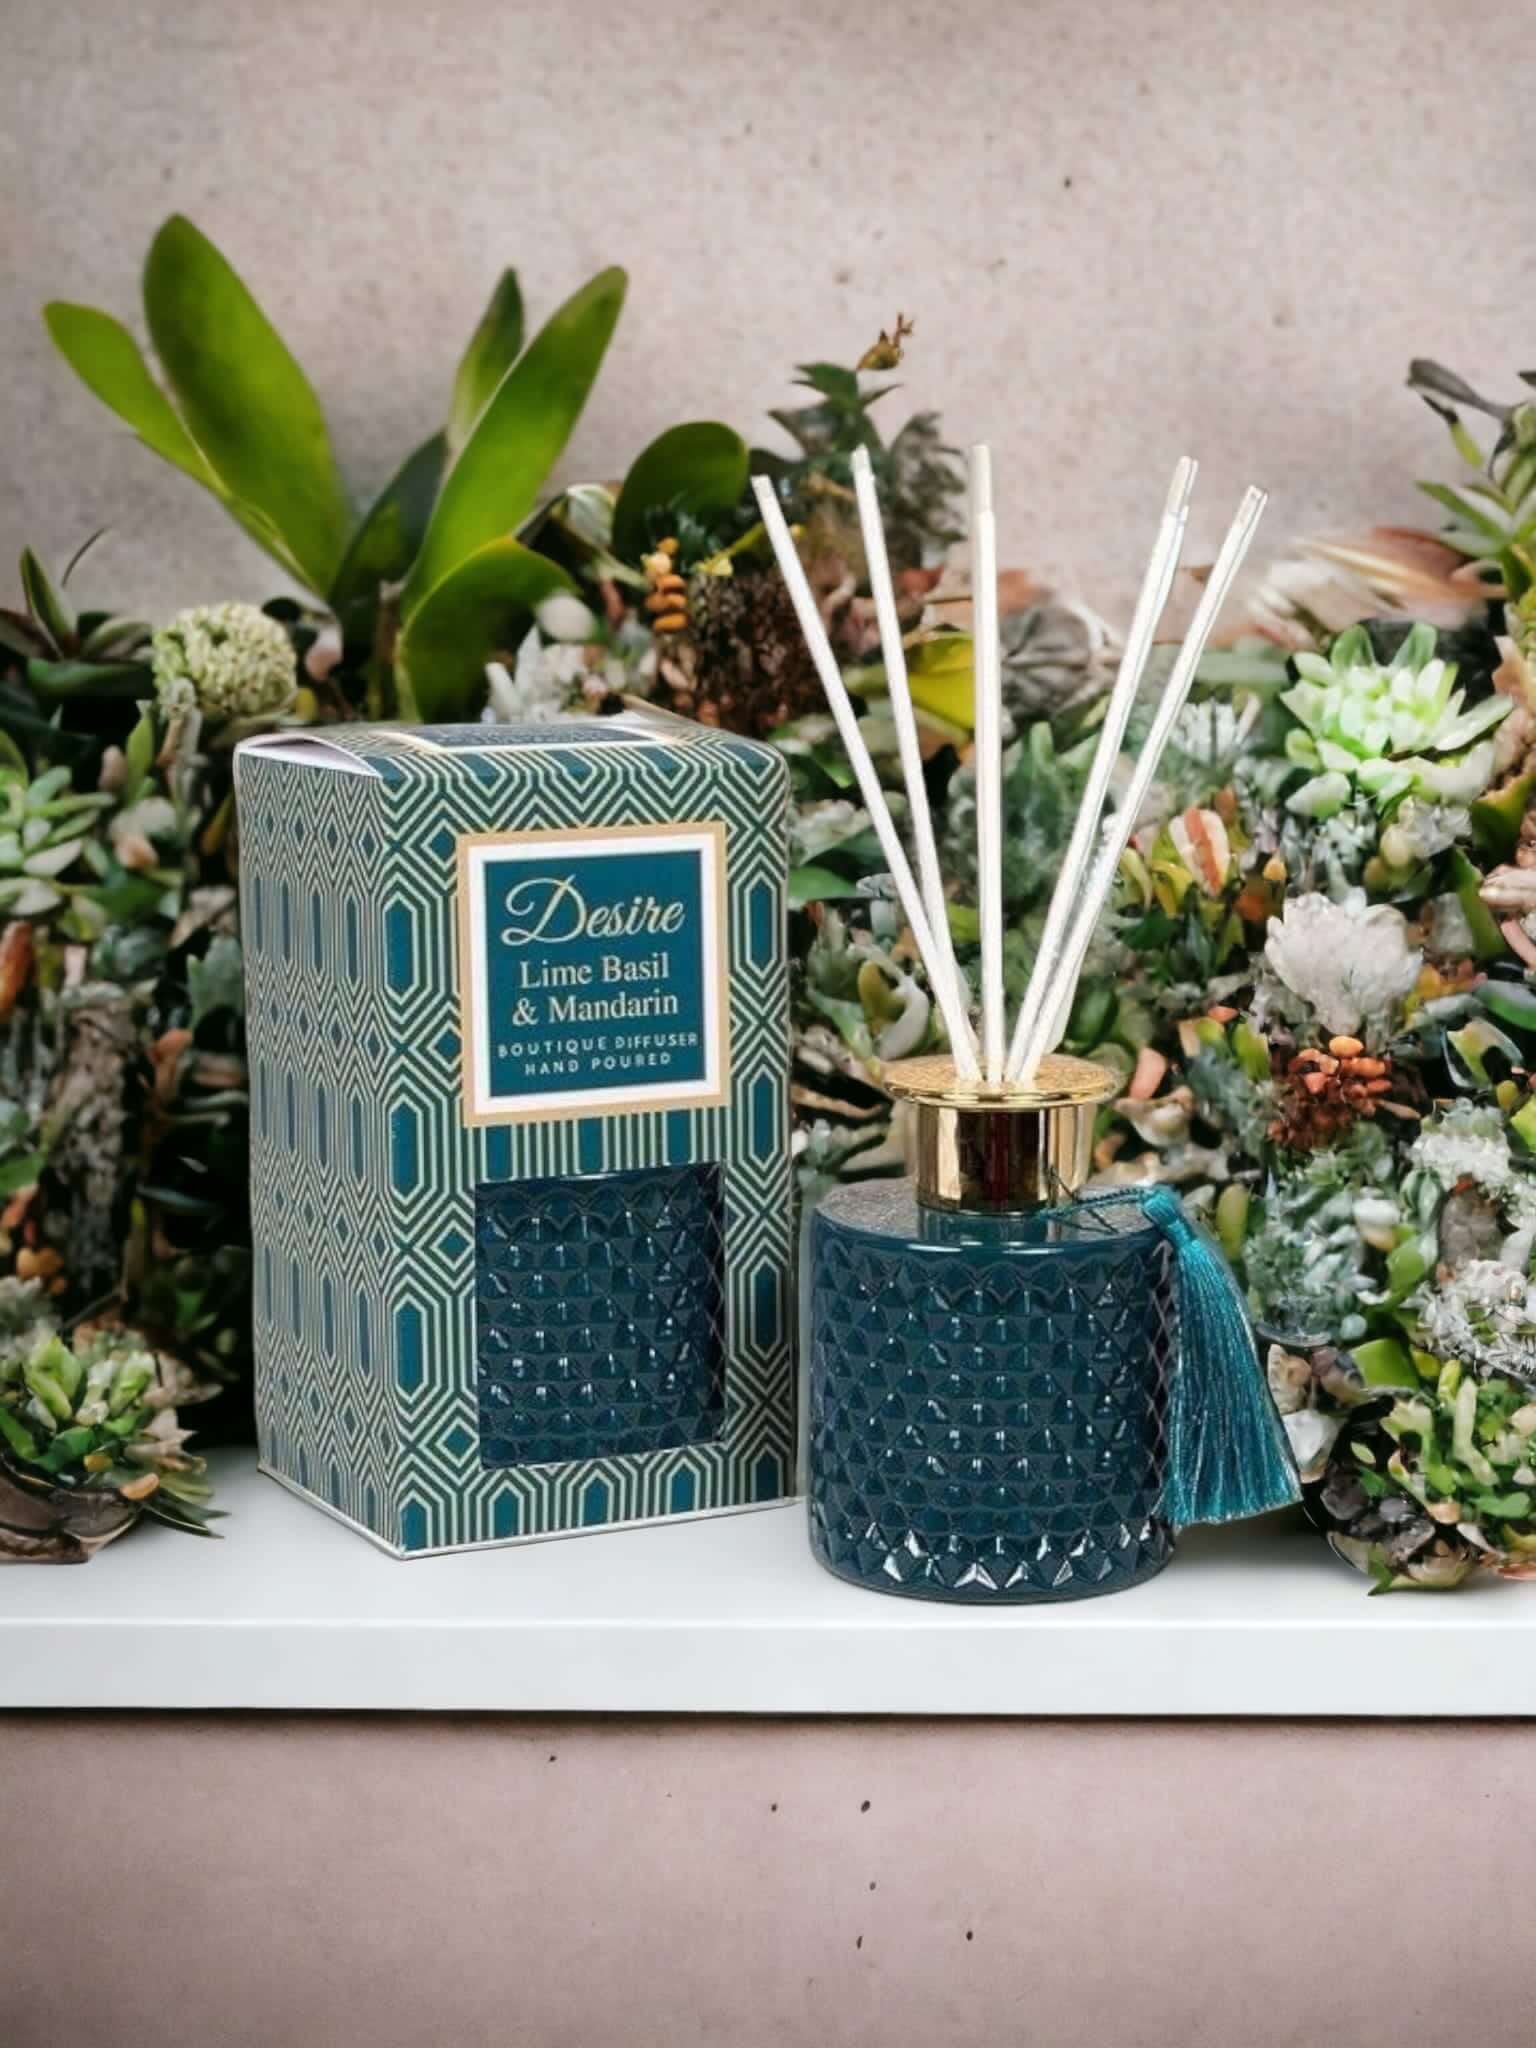 A luxurious Lime Basil And Mandarin reed diffuser from The Soap Gal x with an exquisite design, in front of plants.